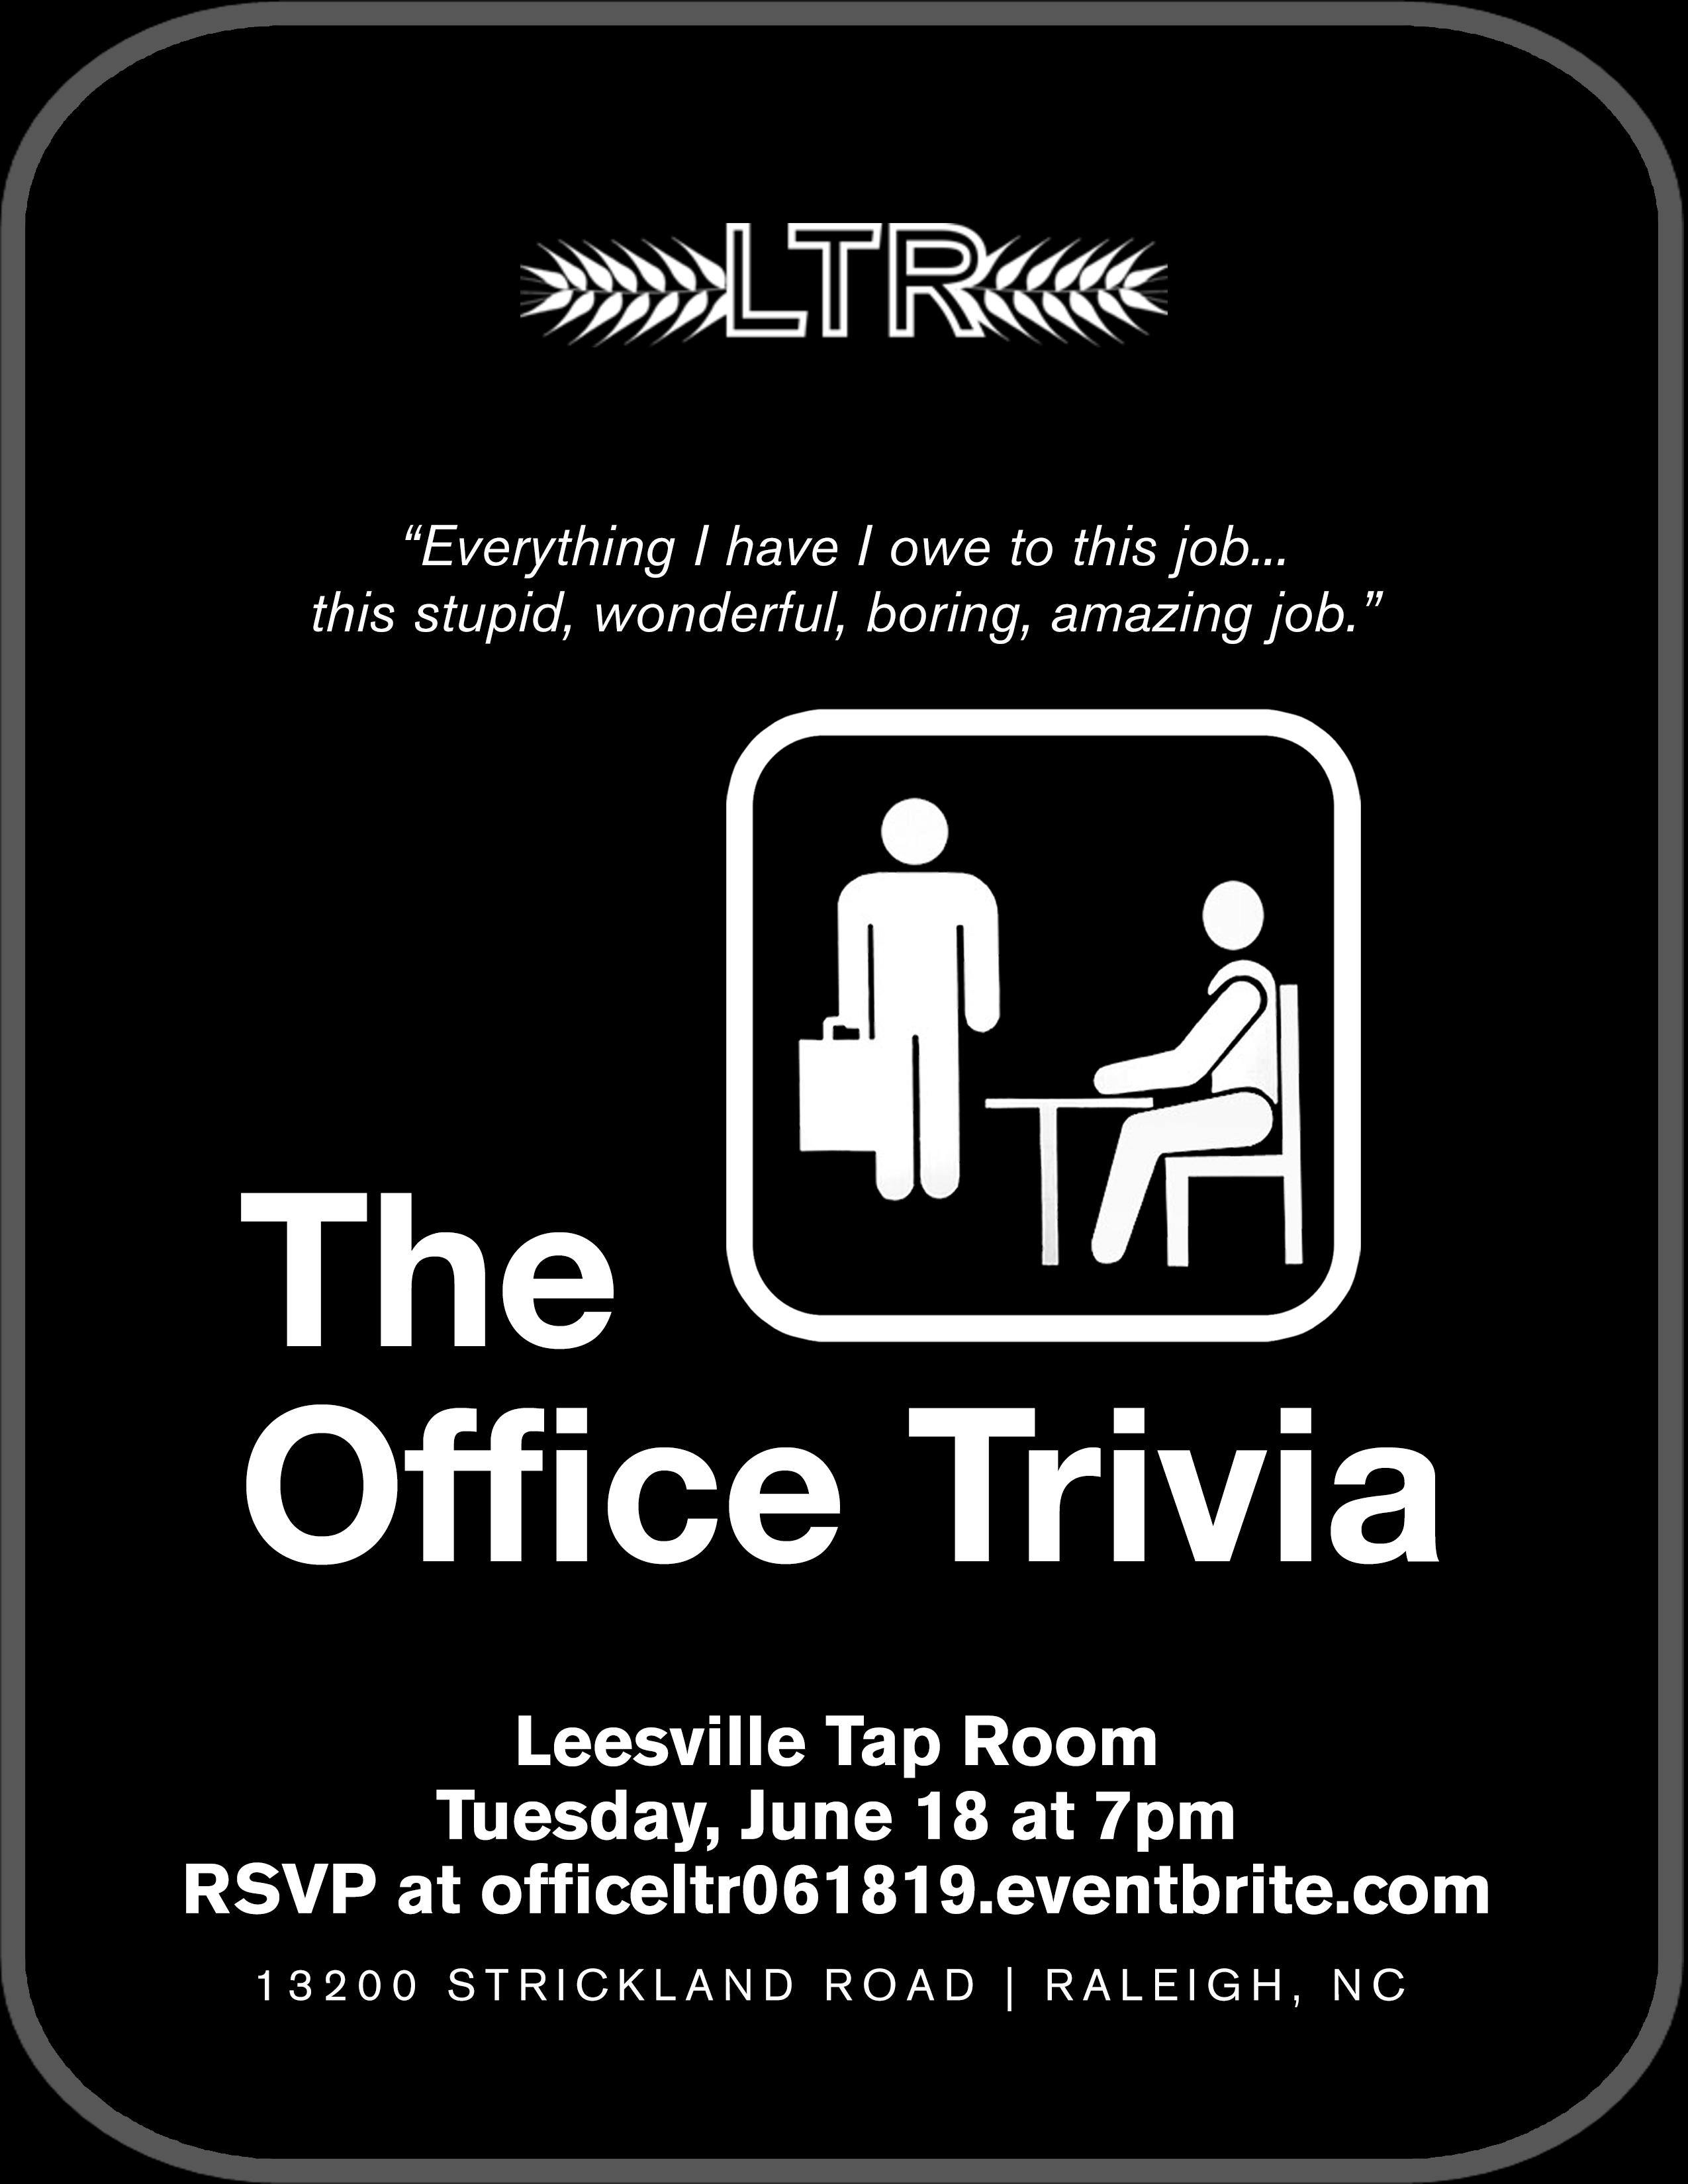 The Office Trivia at Leesville Tap Room